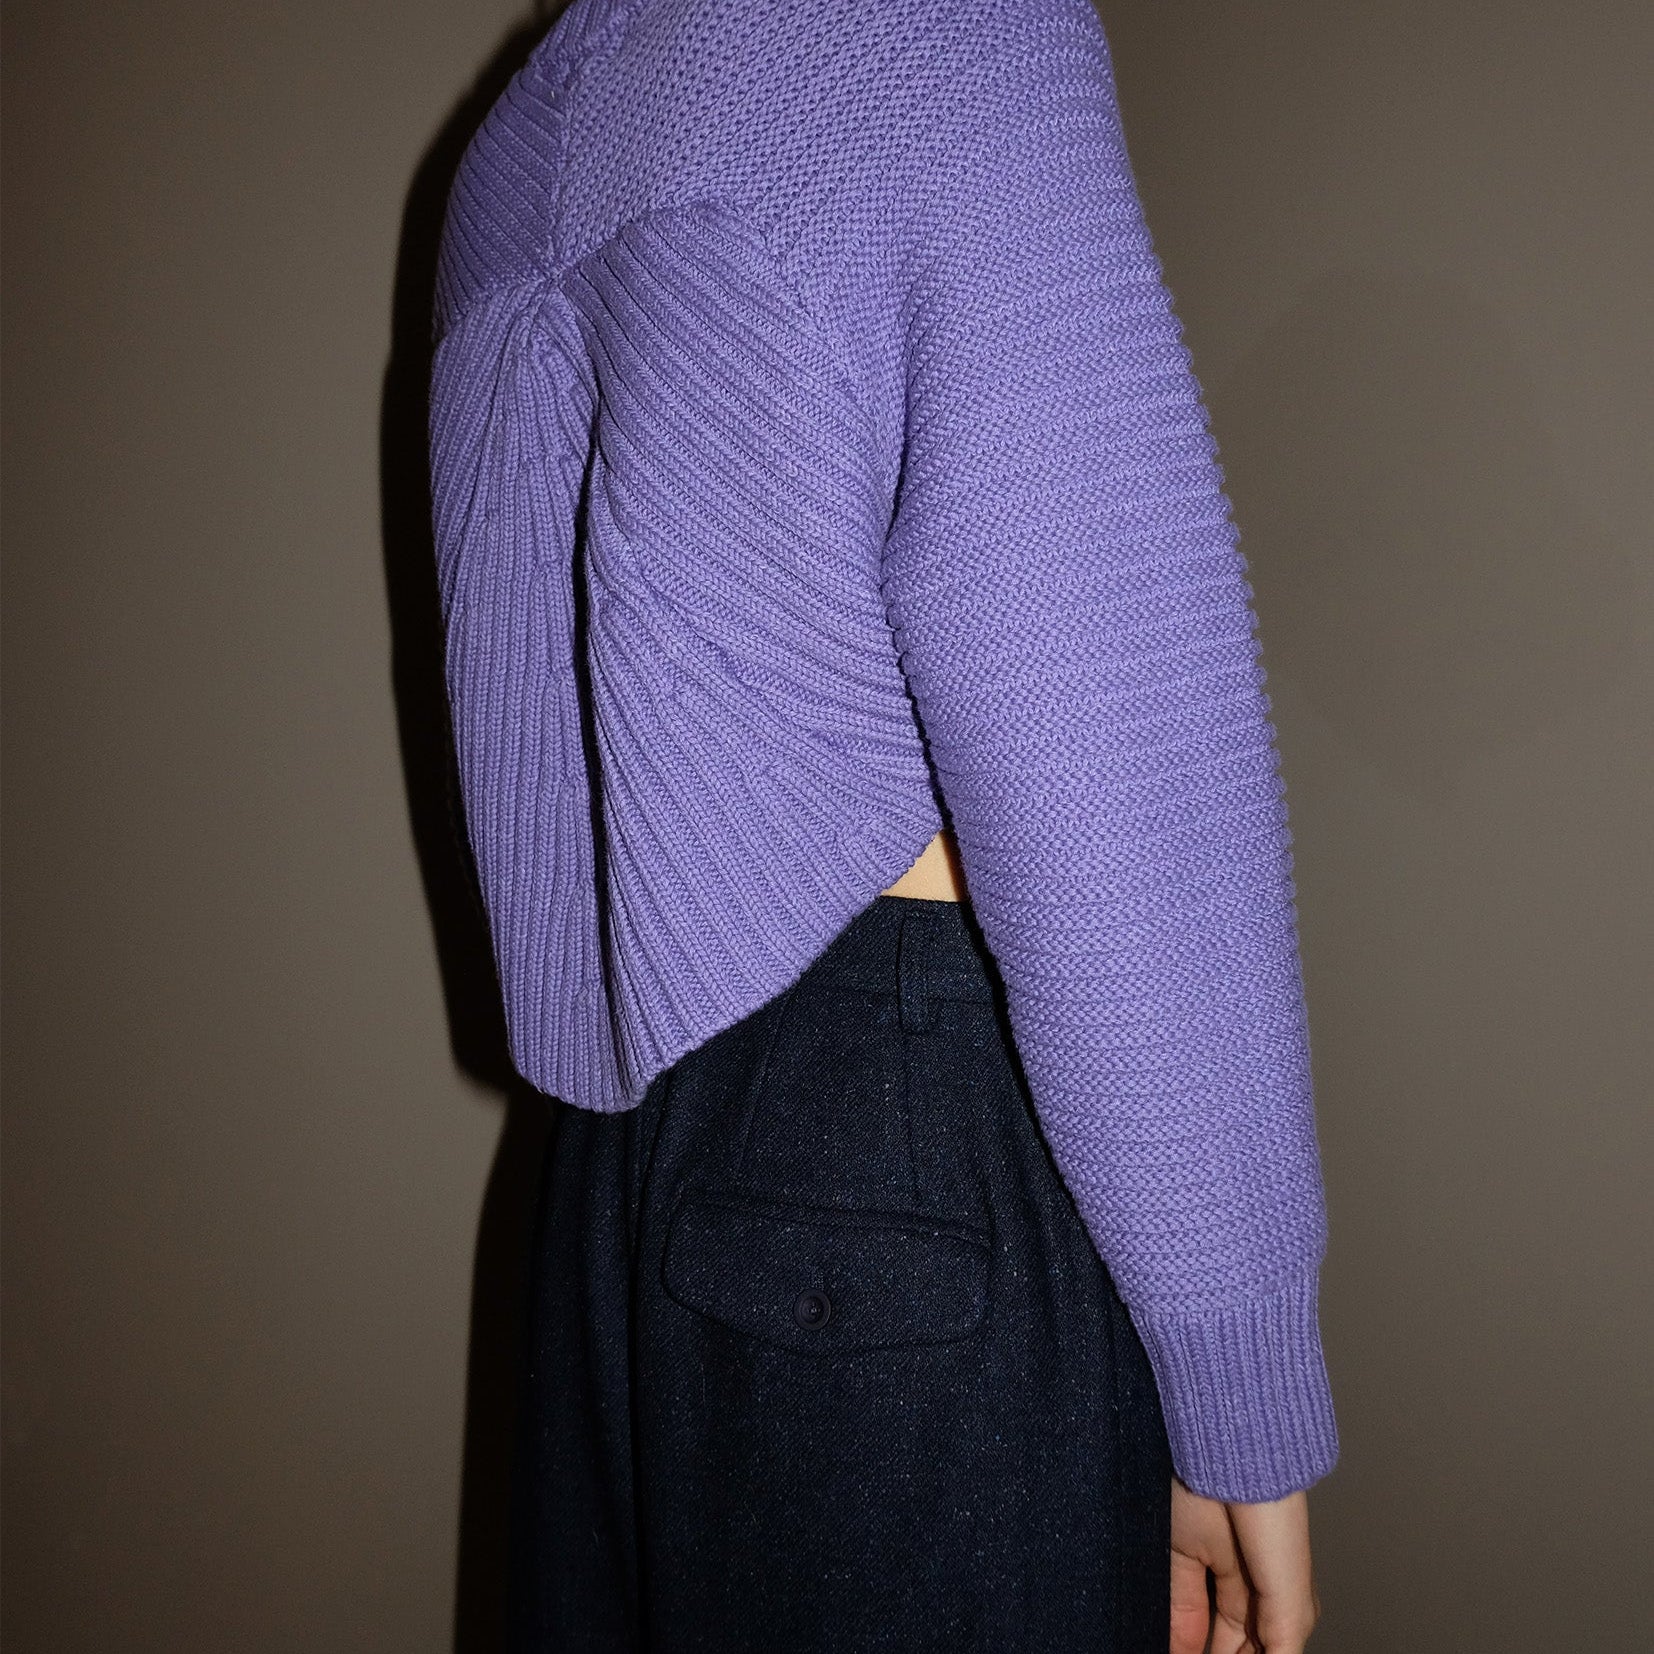 Shell textured coarse knitted jumper in purple